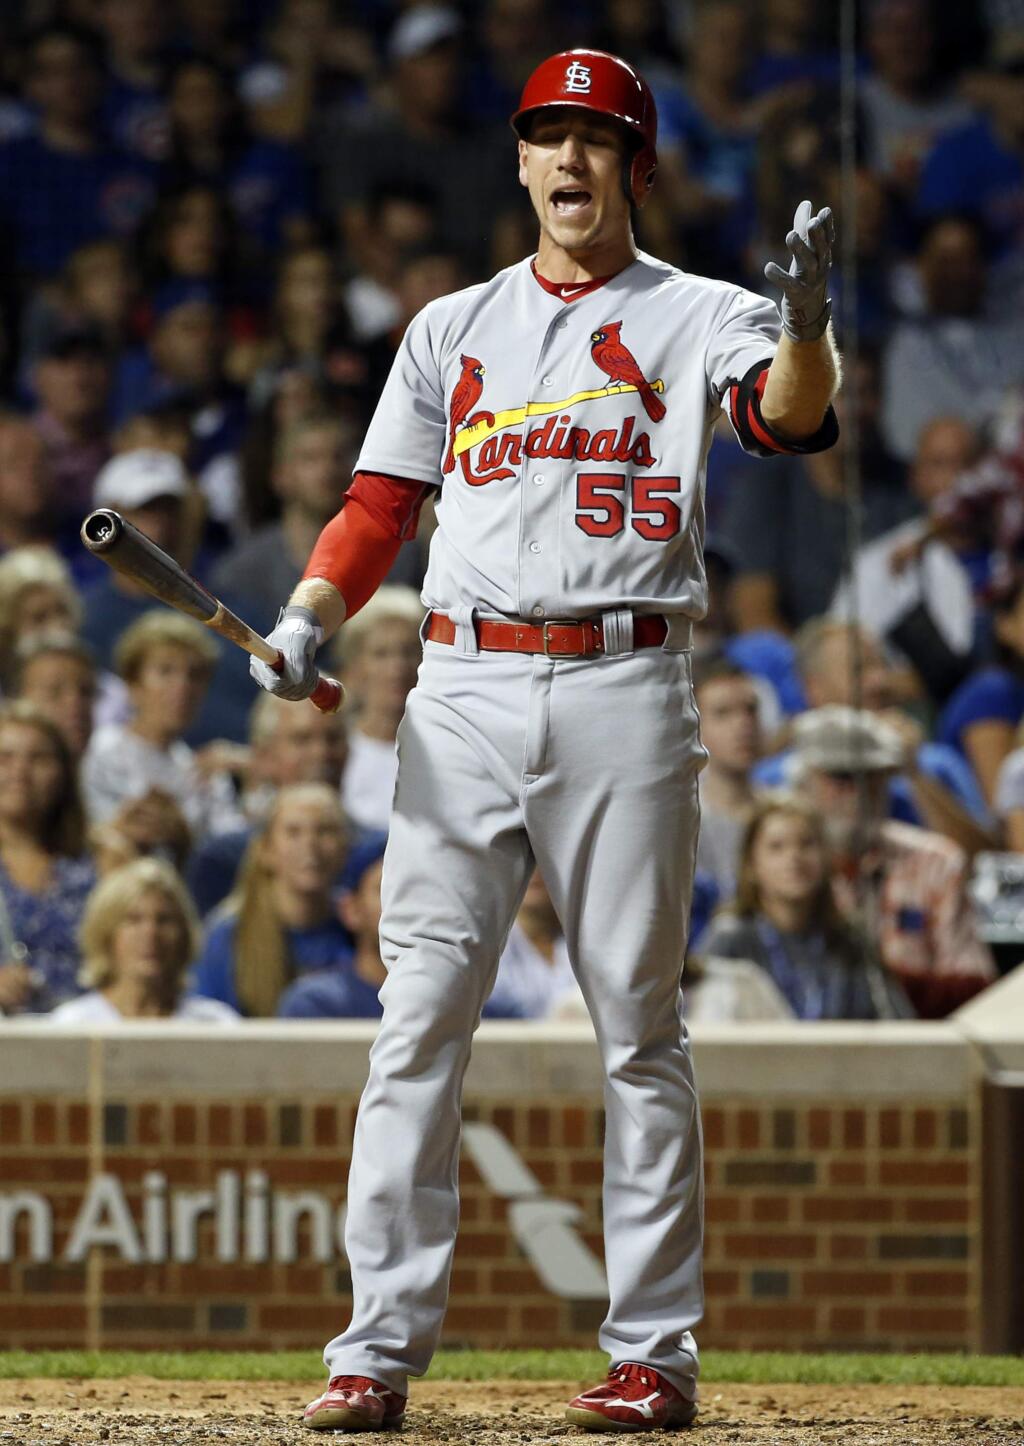 The St. Louis Cardinals' Stephen Piscotty reacts after striking out during the eighth inning against the Chicago Cubs Sunday, Sept. 25, 2016, in Chicago. (AP Photo/Nam Y. Huh)